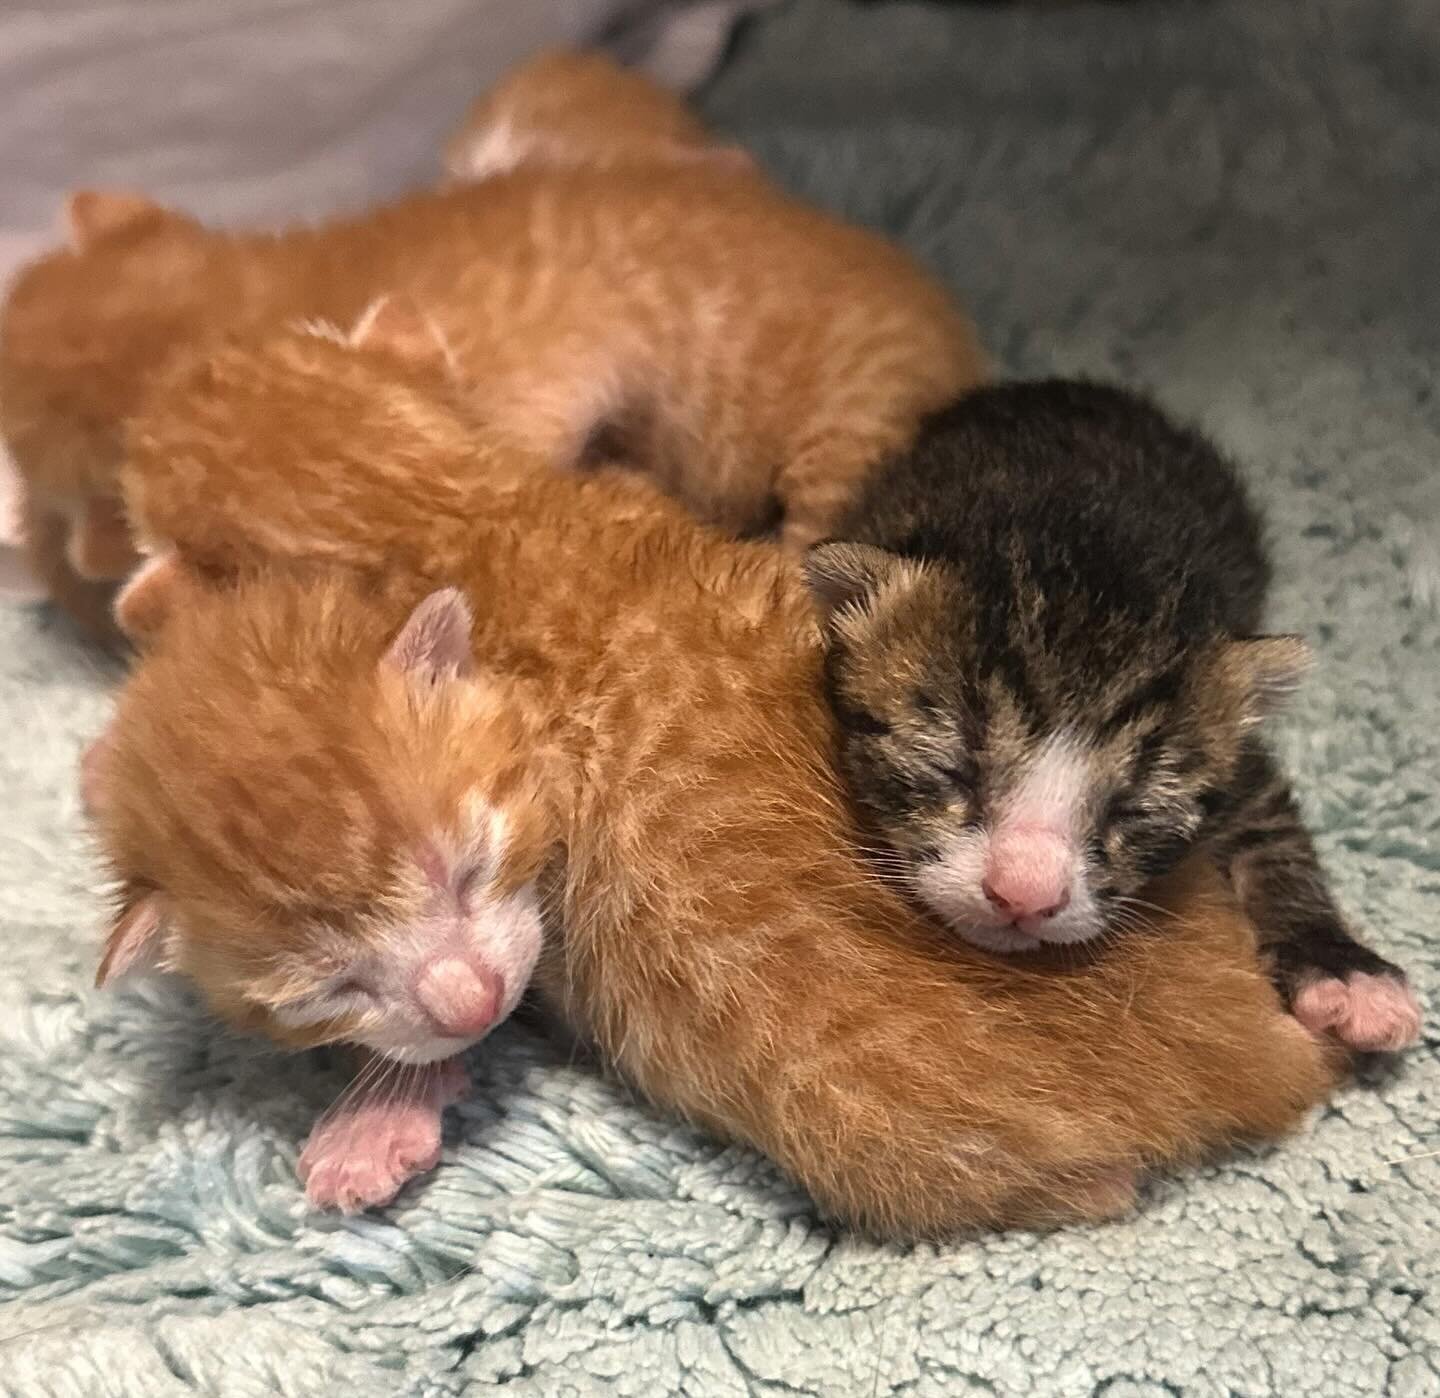 We are seeking to raise approximately $2,000 to support a Mama cat and her five kittens. They were discovered in Waipahu by one of our past adopters, where children were throwing rocks at them. At the time, the mother had recently given birth. The fu